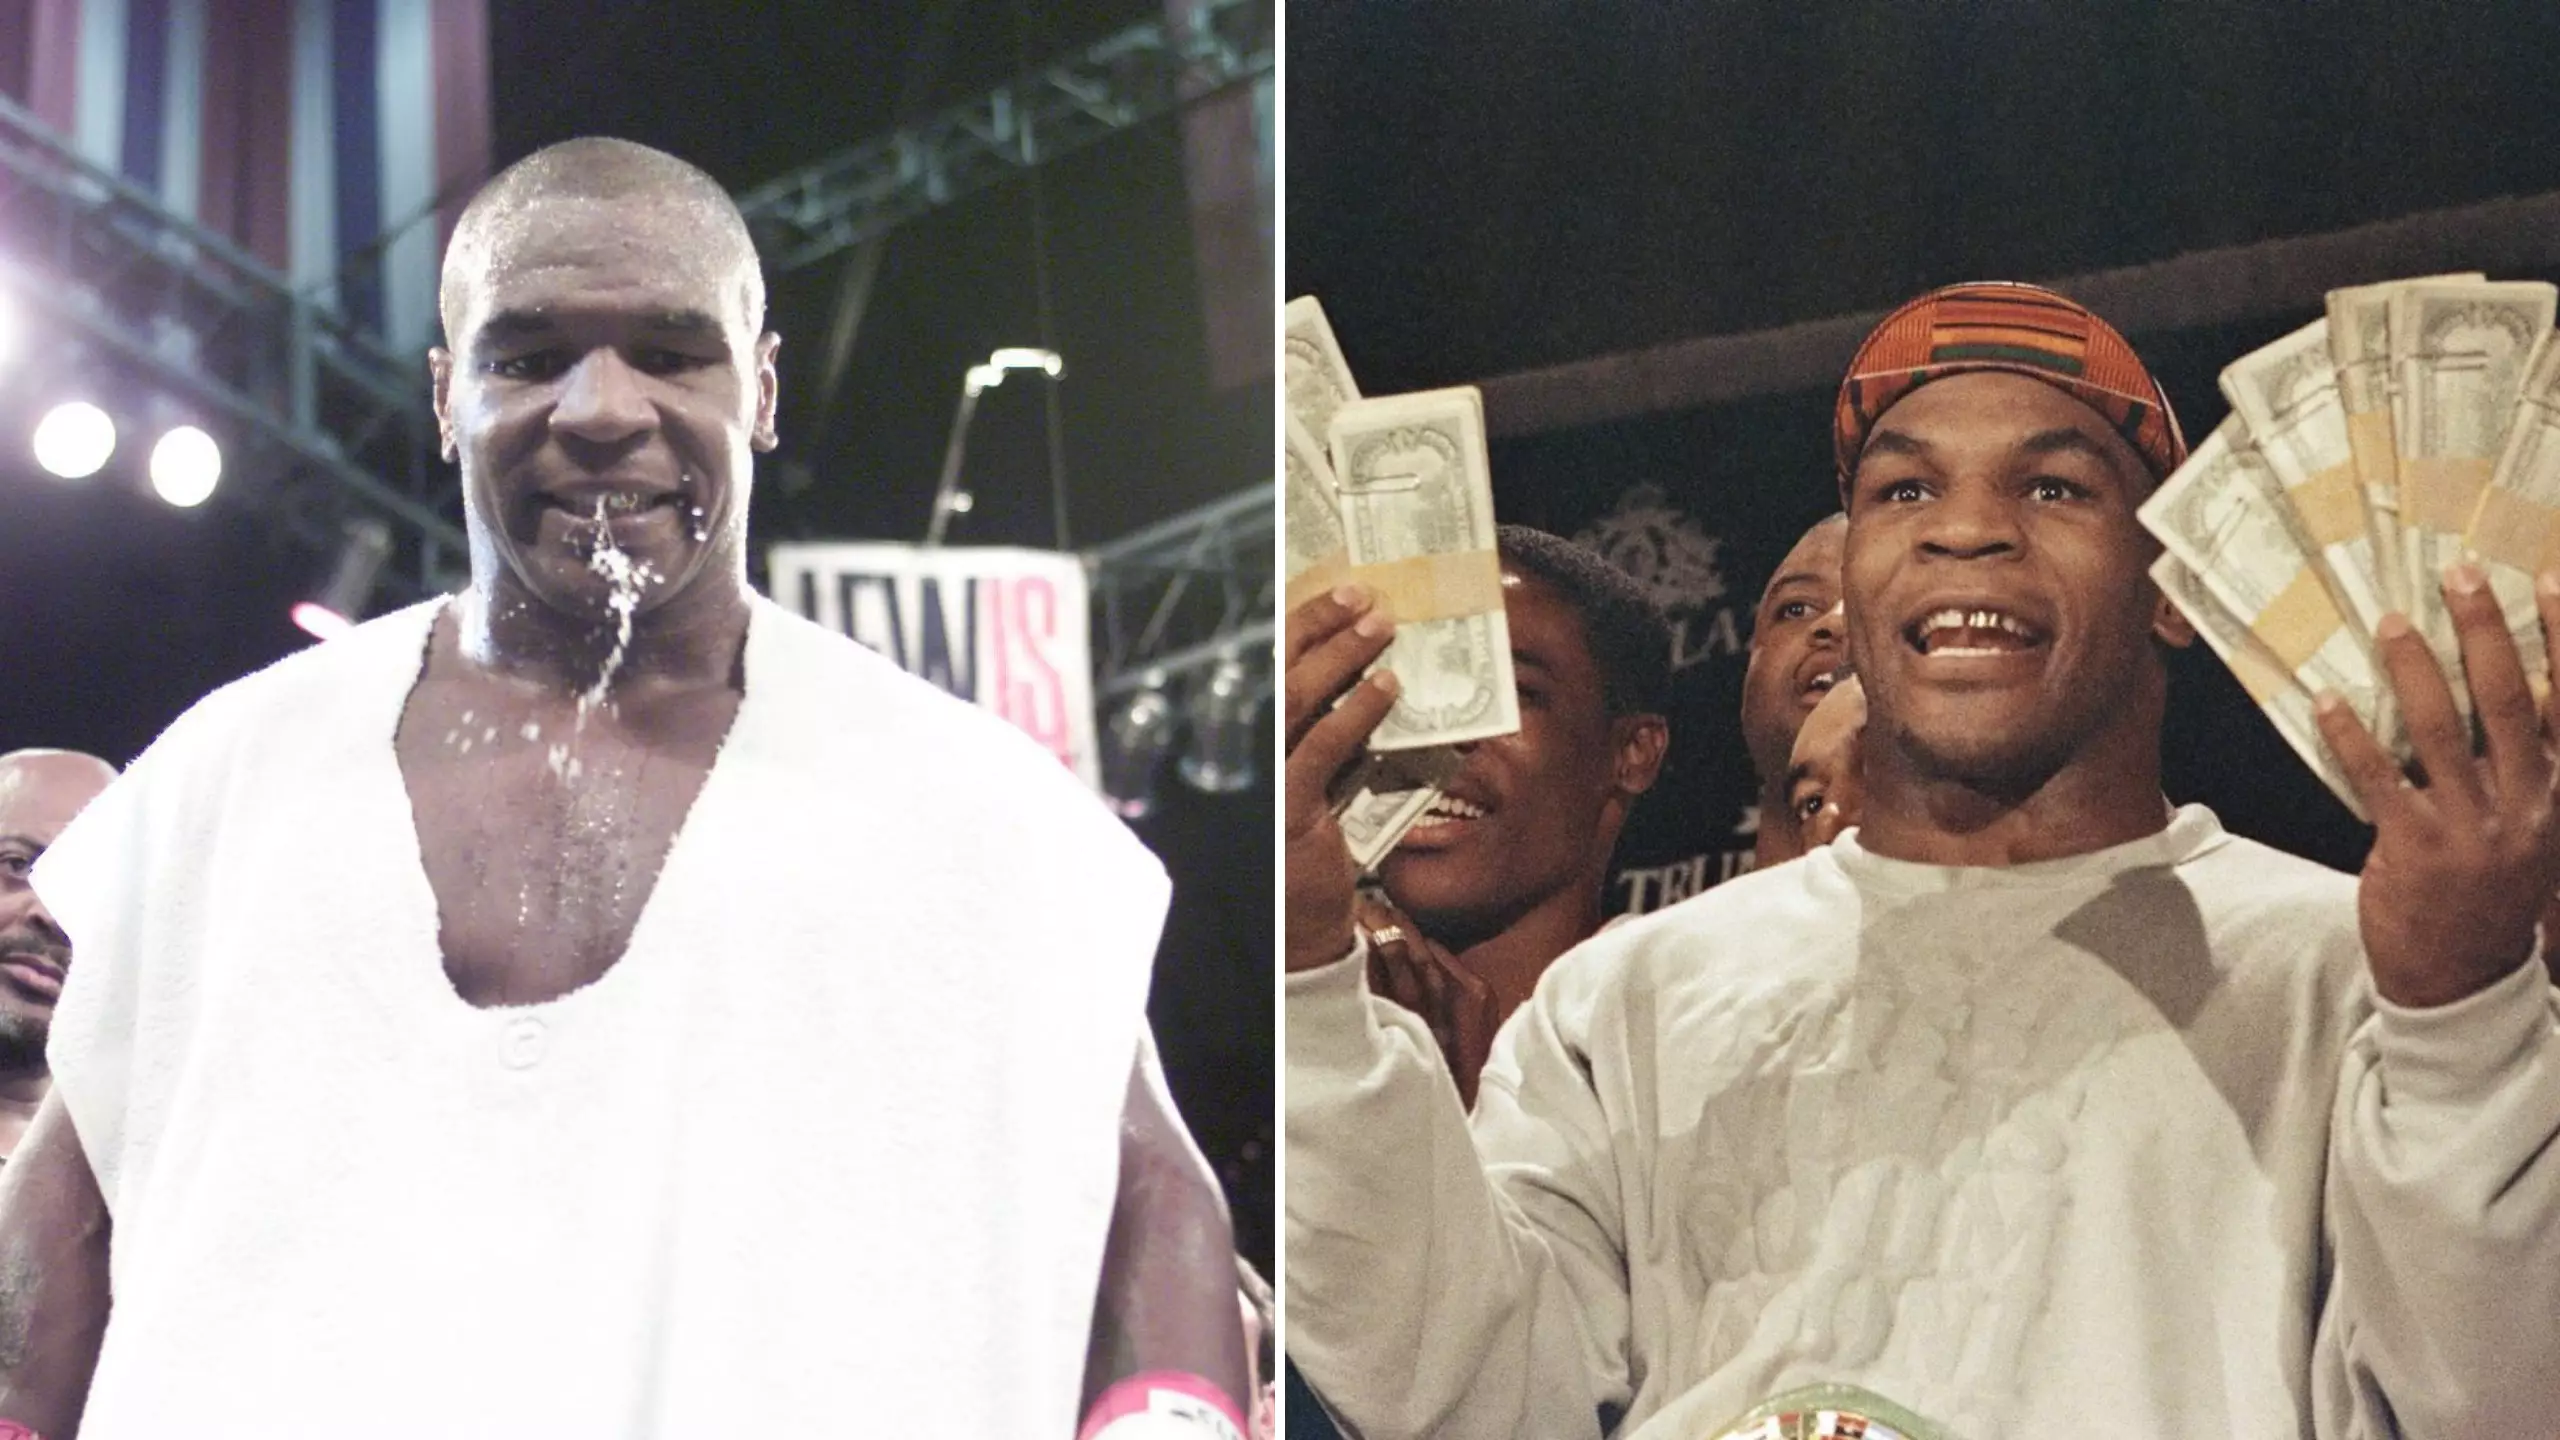 Mike Tyson Paid A Fan $8 Million For "Breaking Their F**king Jaw" In Autograph Dispute